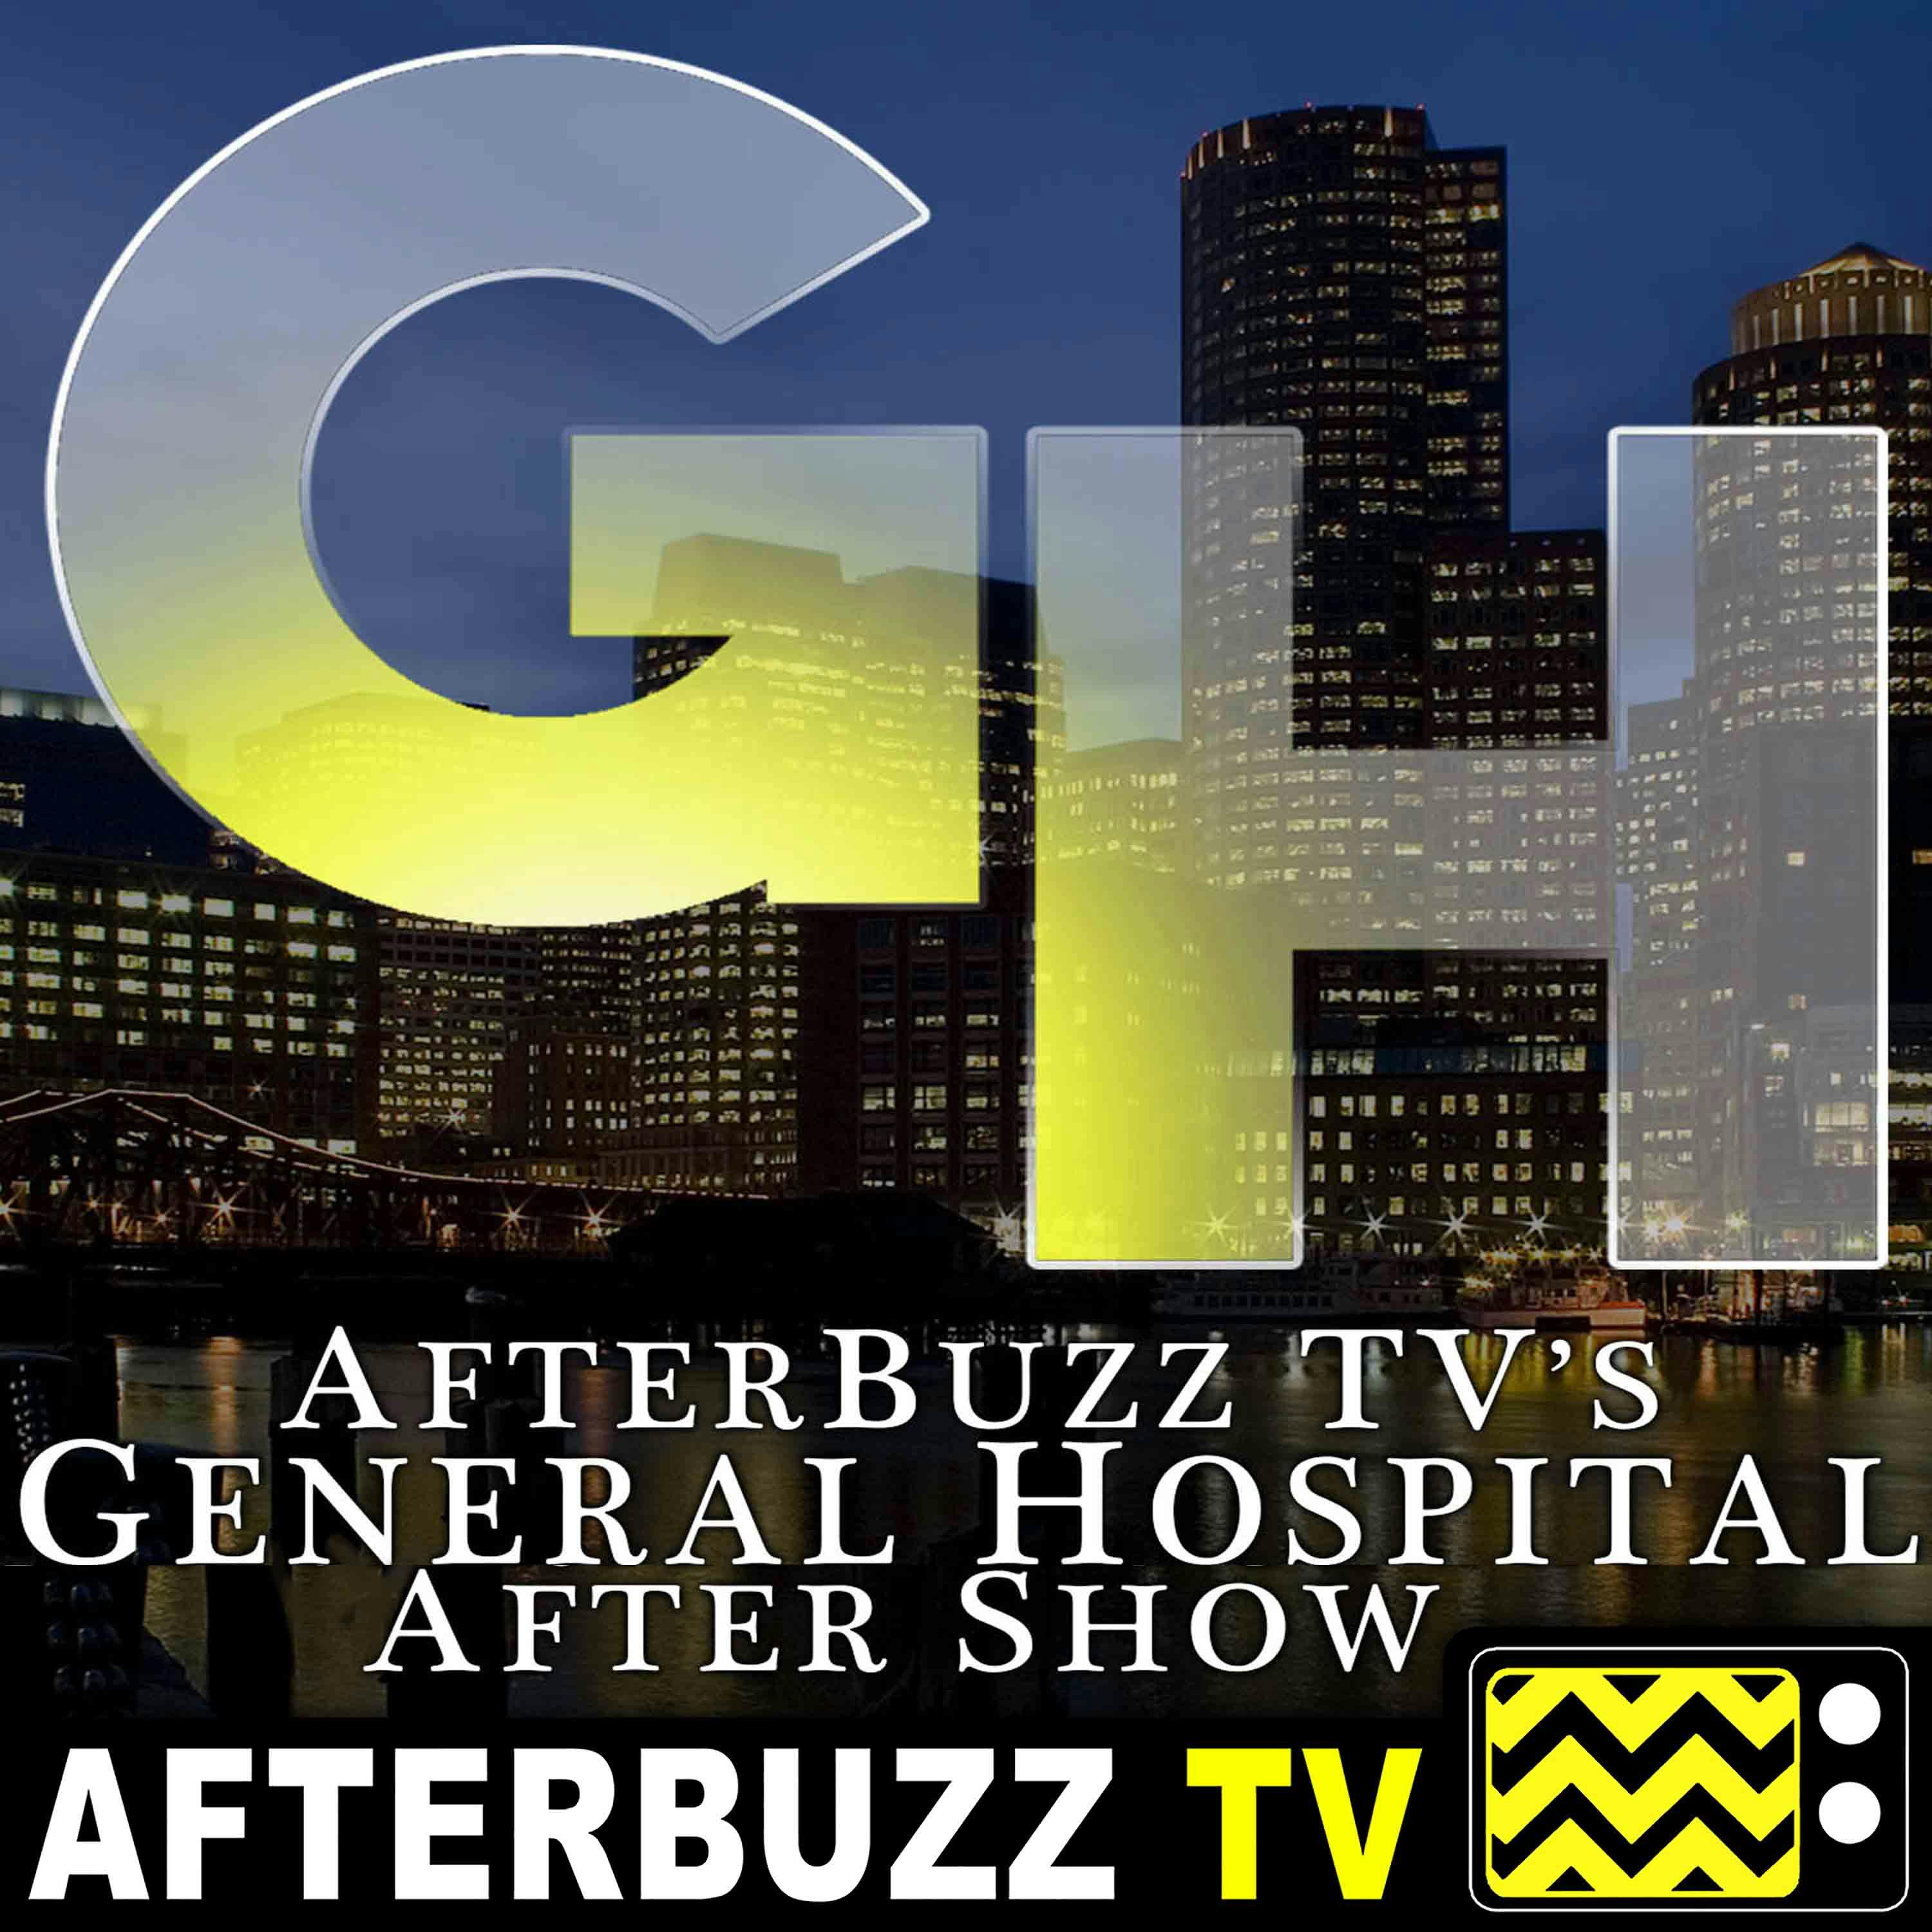 Review Of General Hospital for January 14th - January 18th, 2019